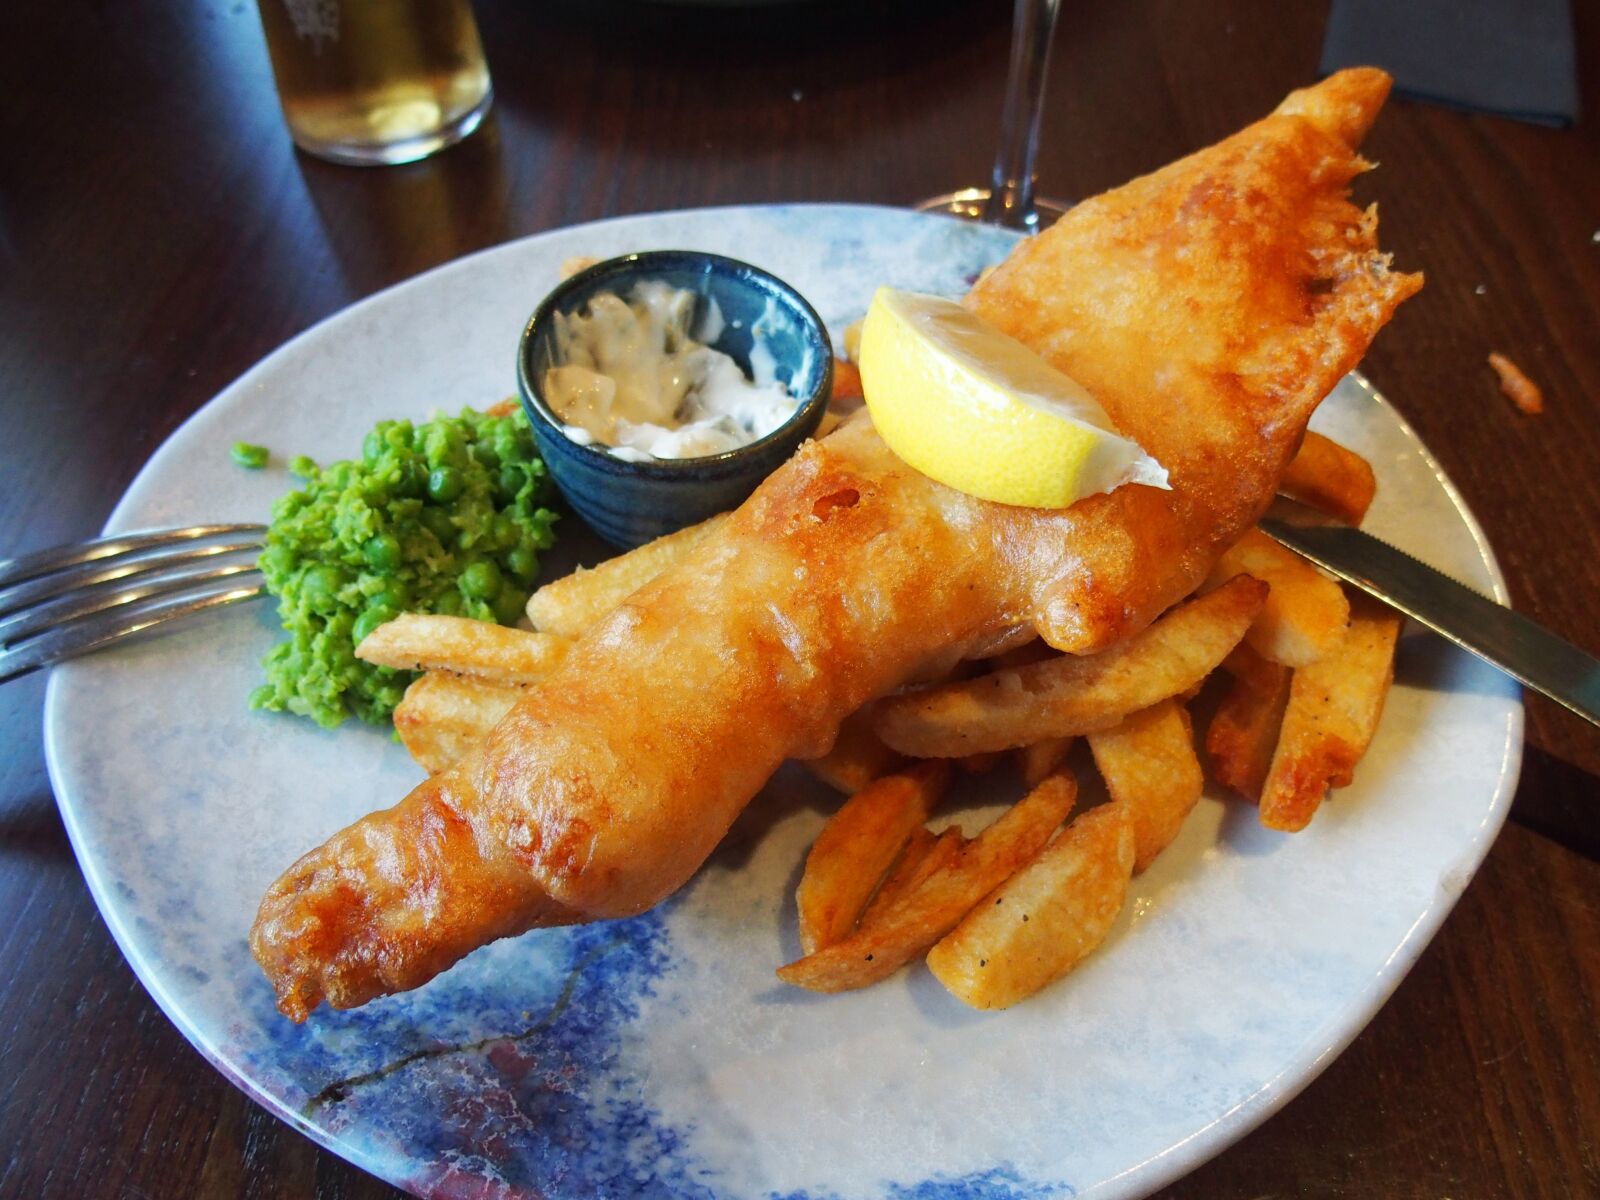 Olympus STYLUS1 sample photo. Fish and chips, scotland photography